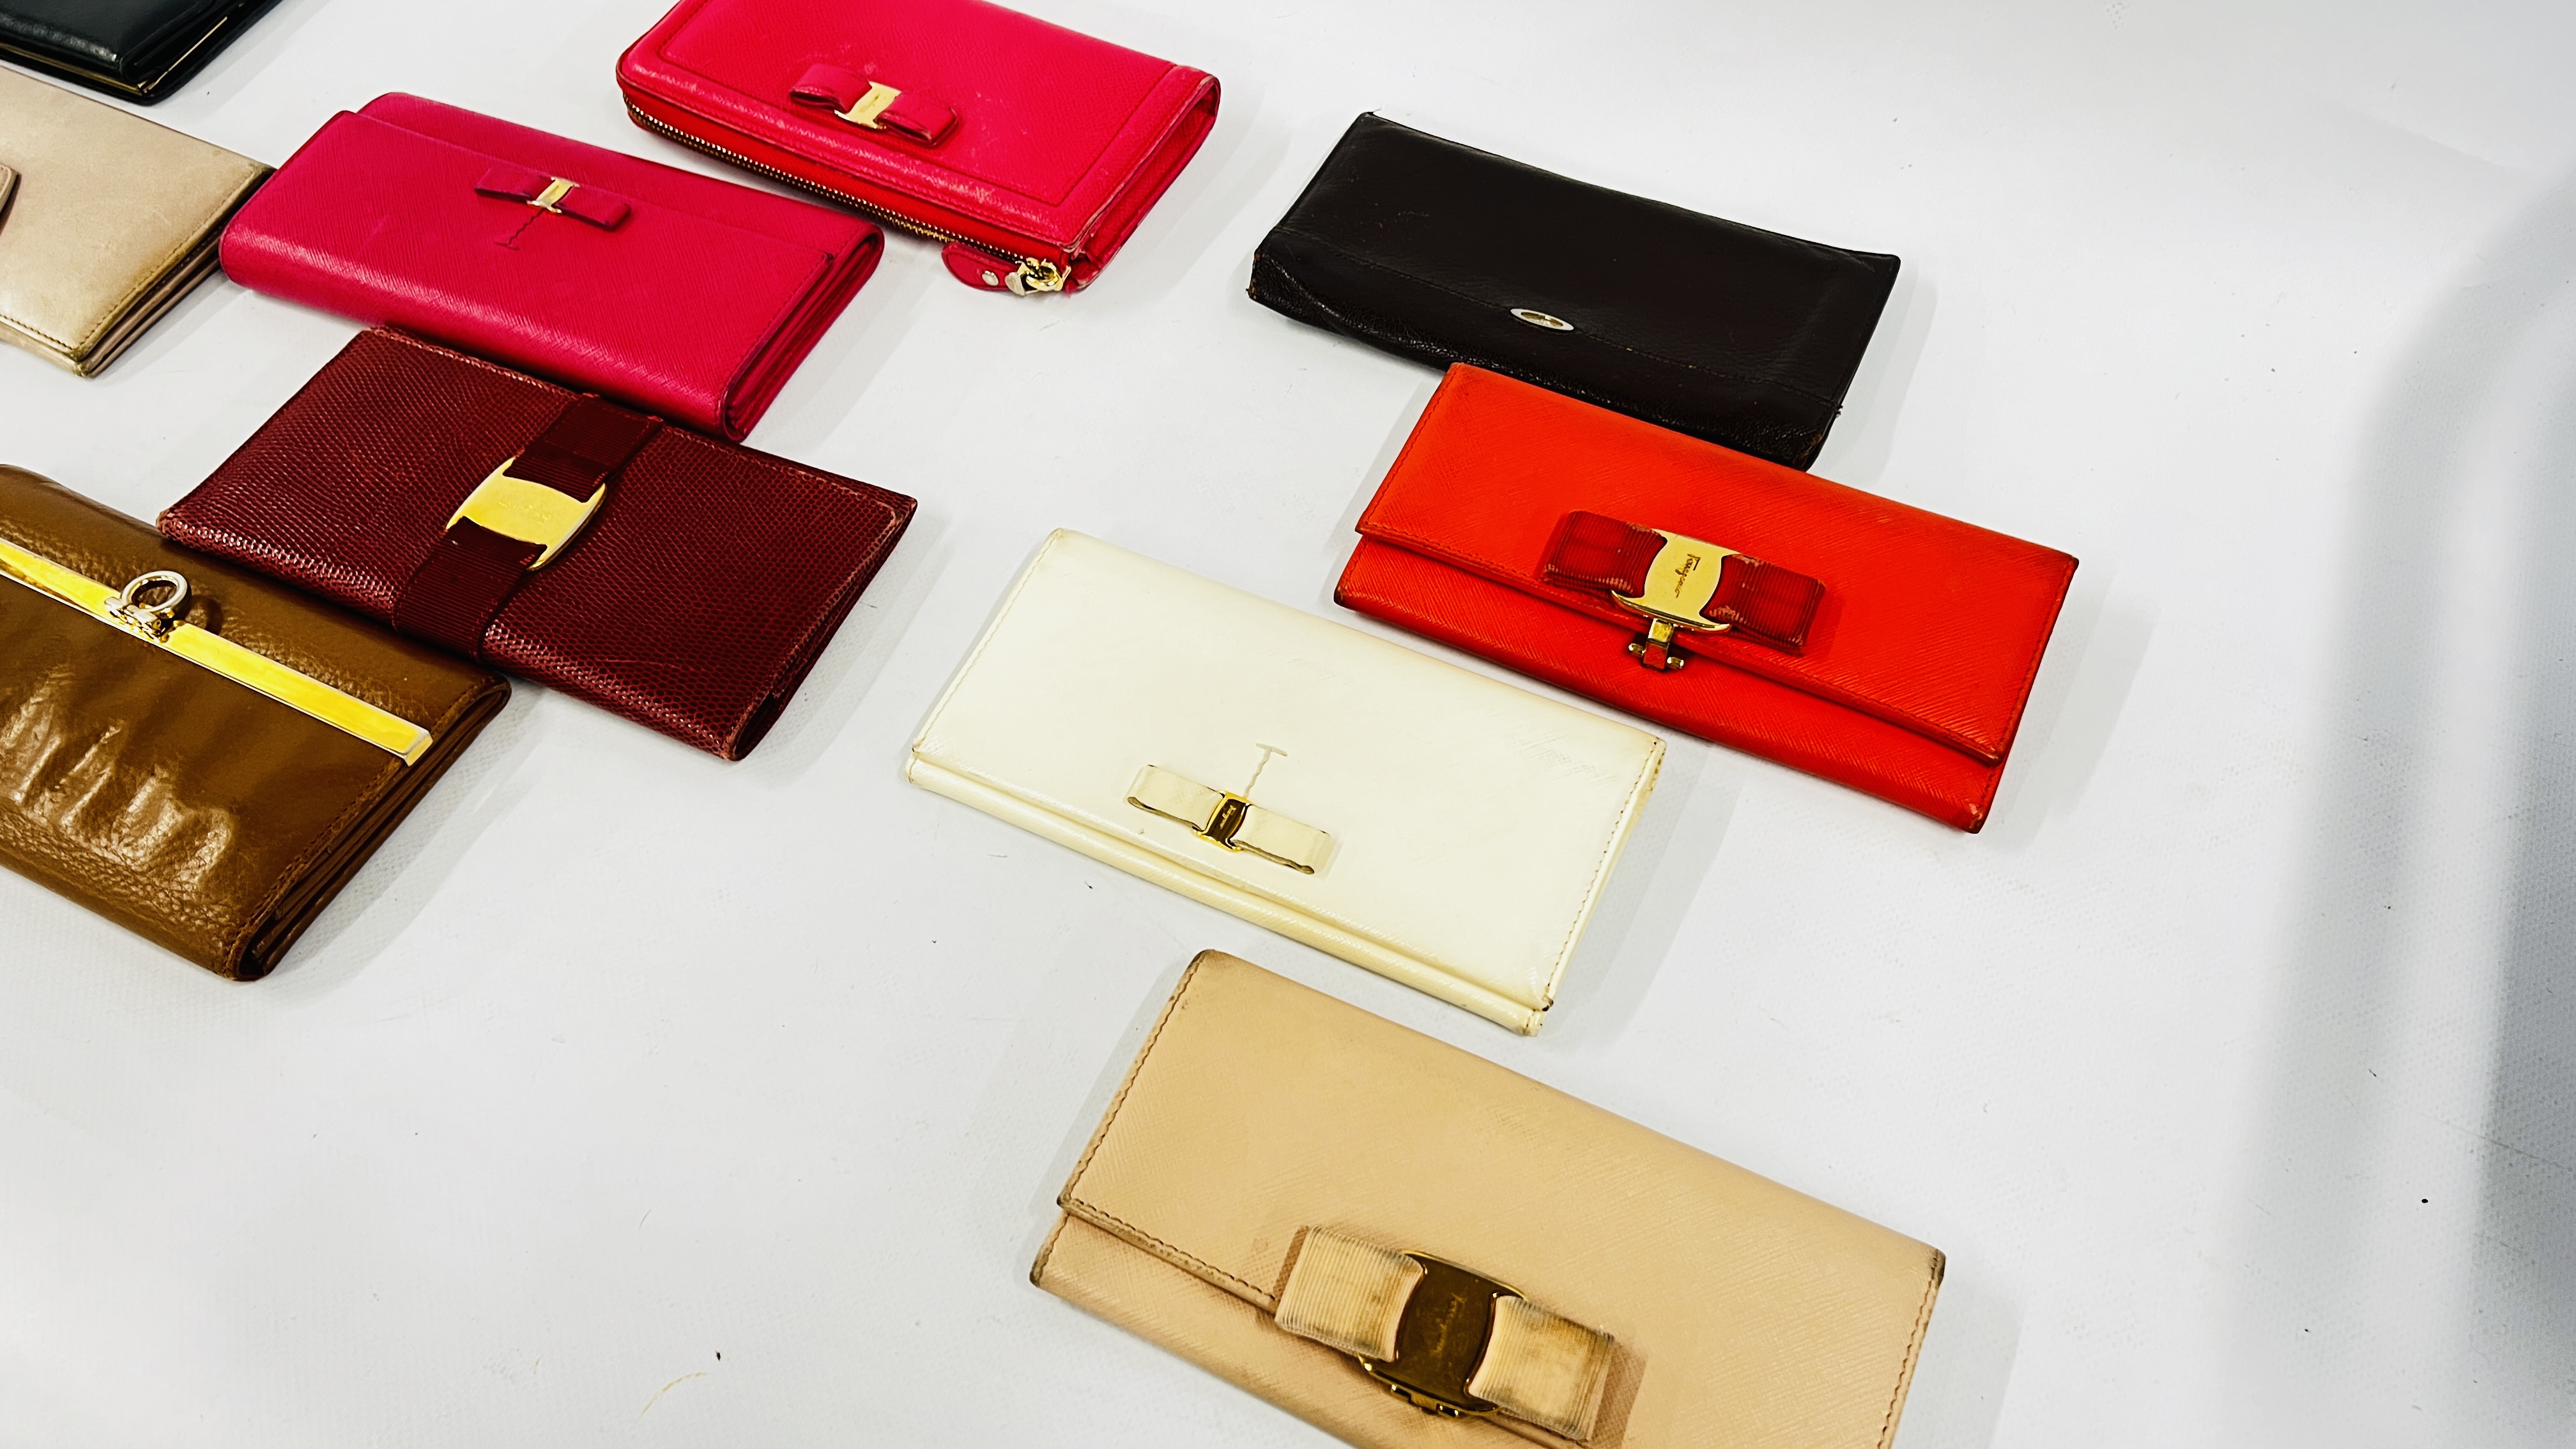 A COLLECTION OF 11 DESIGNER PURSES MARKED "SALVADOR FERRAGAMA". - Image 4 of 5